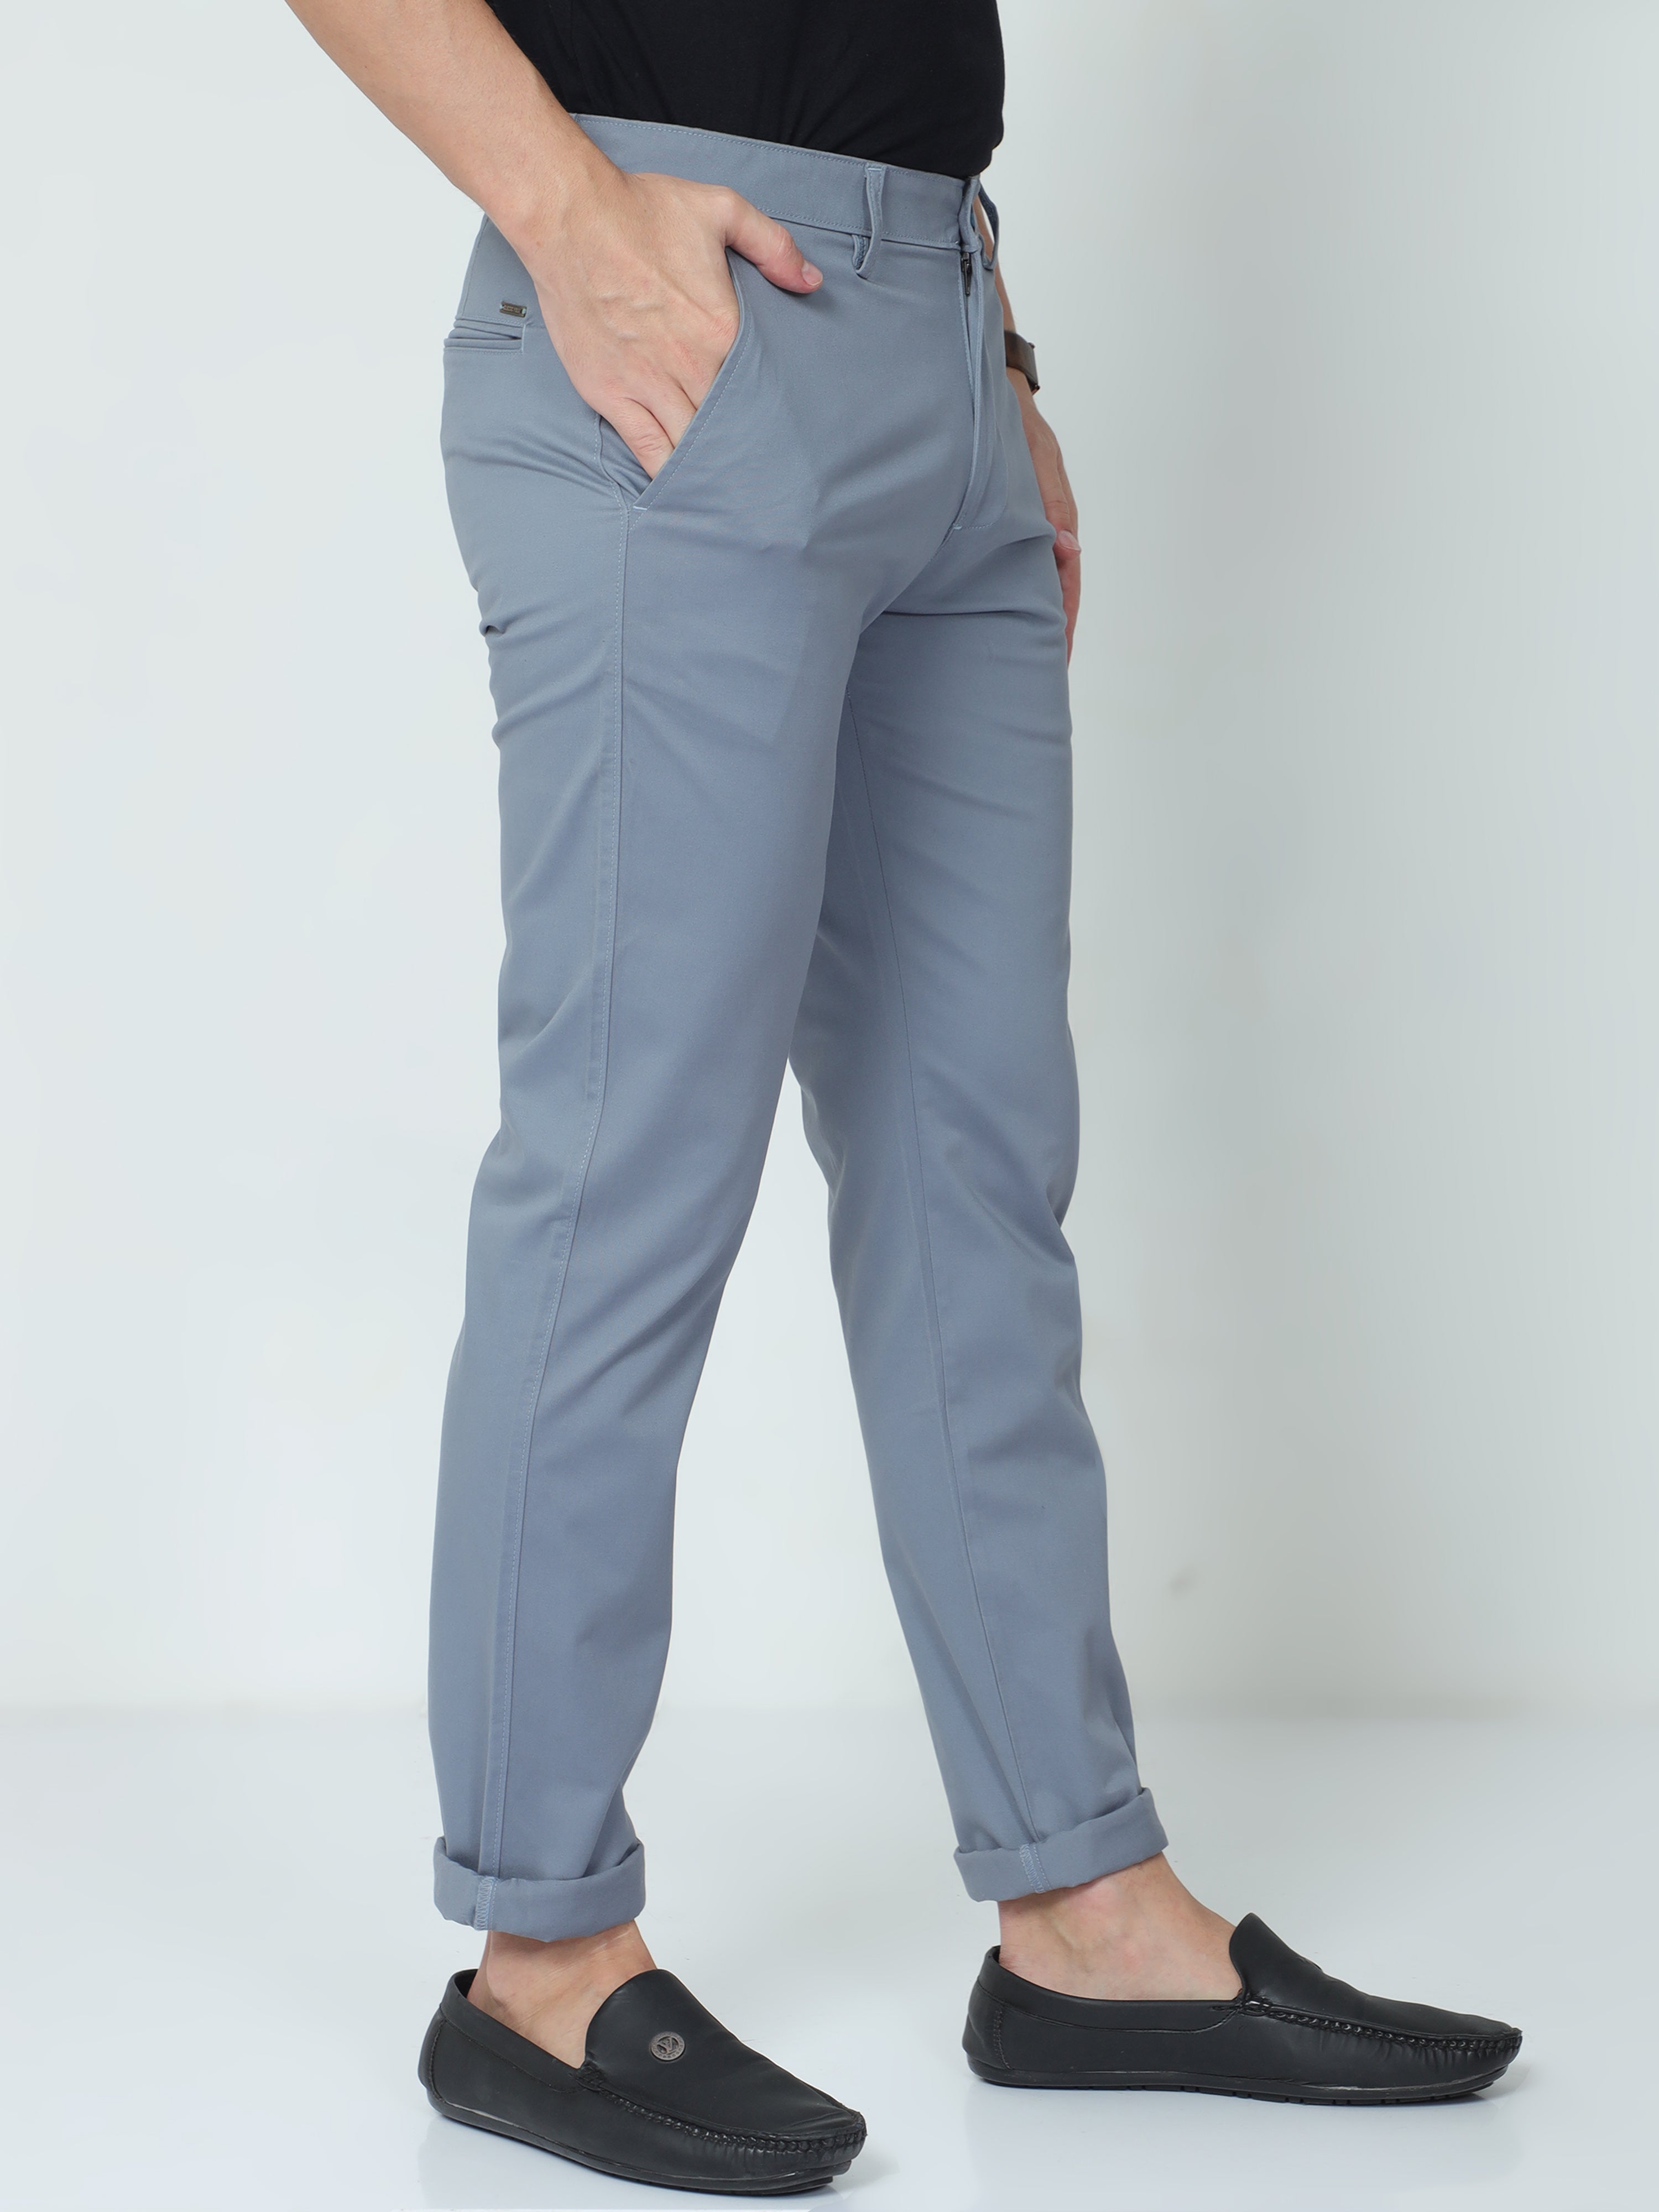 Classic Polo Mens Moderate Fit Solid Light Blue Color Trousers | To2-17 B-Blu-Mf-Ly